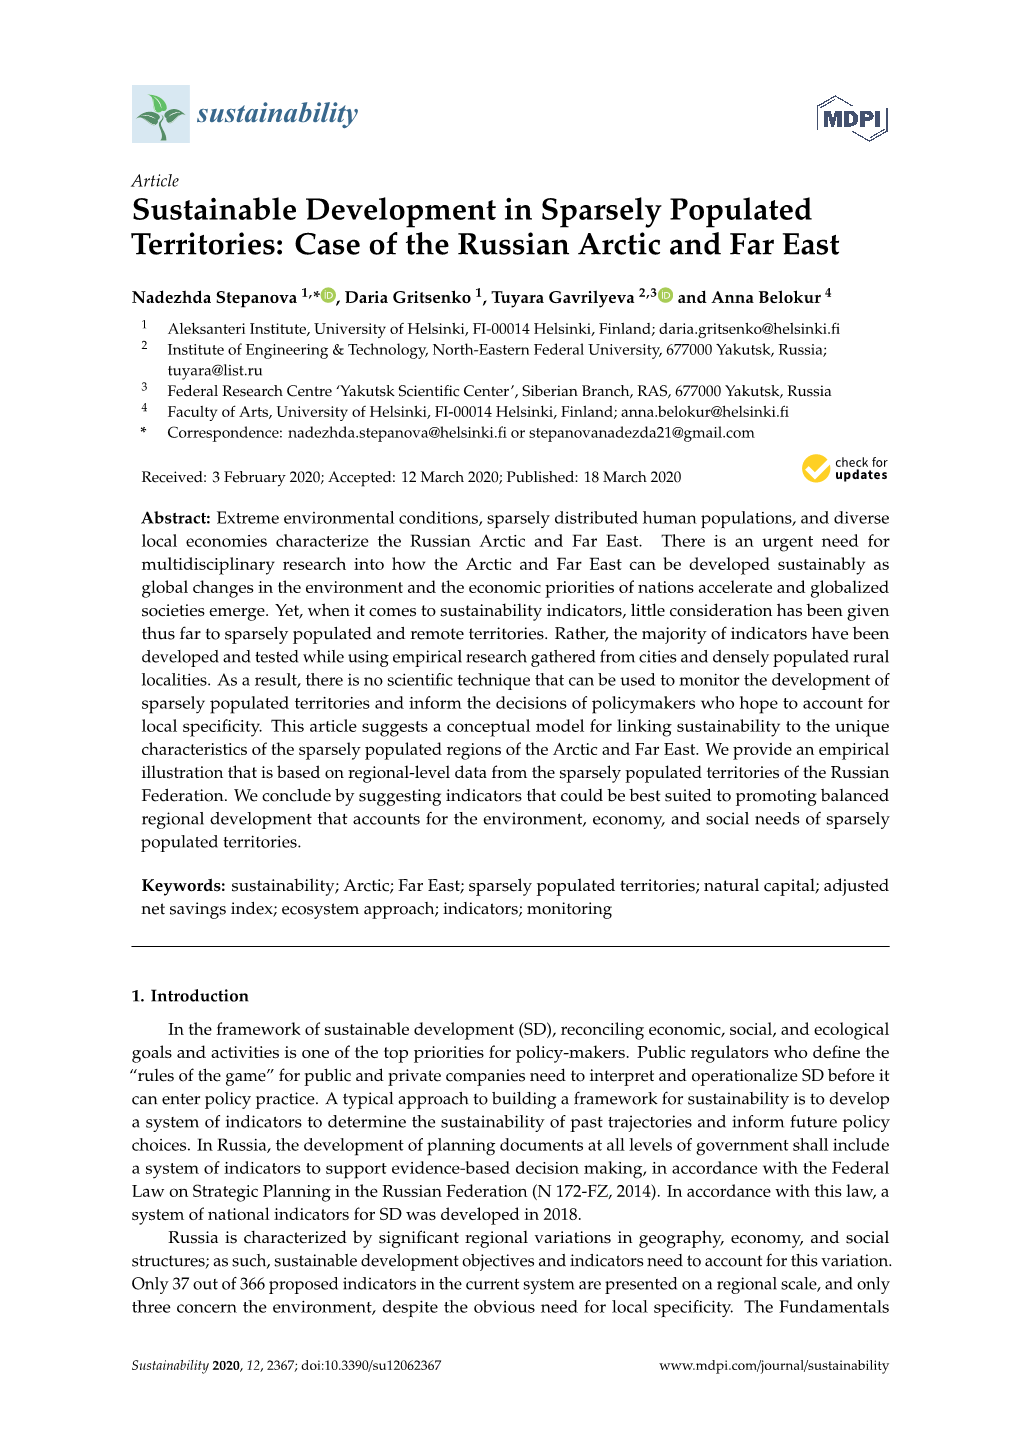 Sustainable Development in Sparsely Populated Territories: Case of the Russian Arctic and Far East